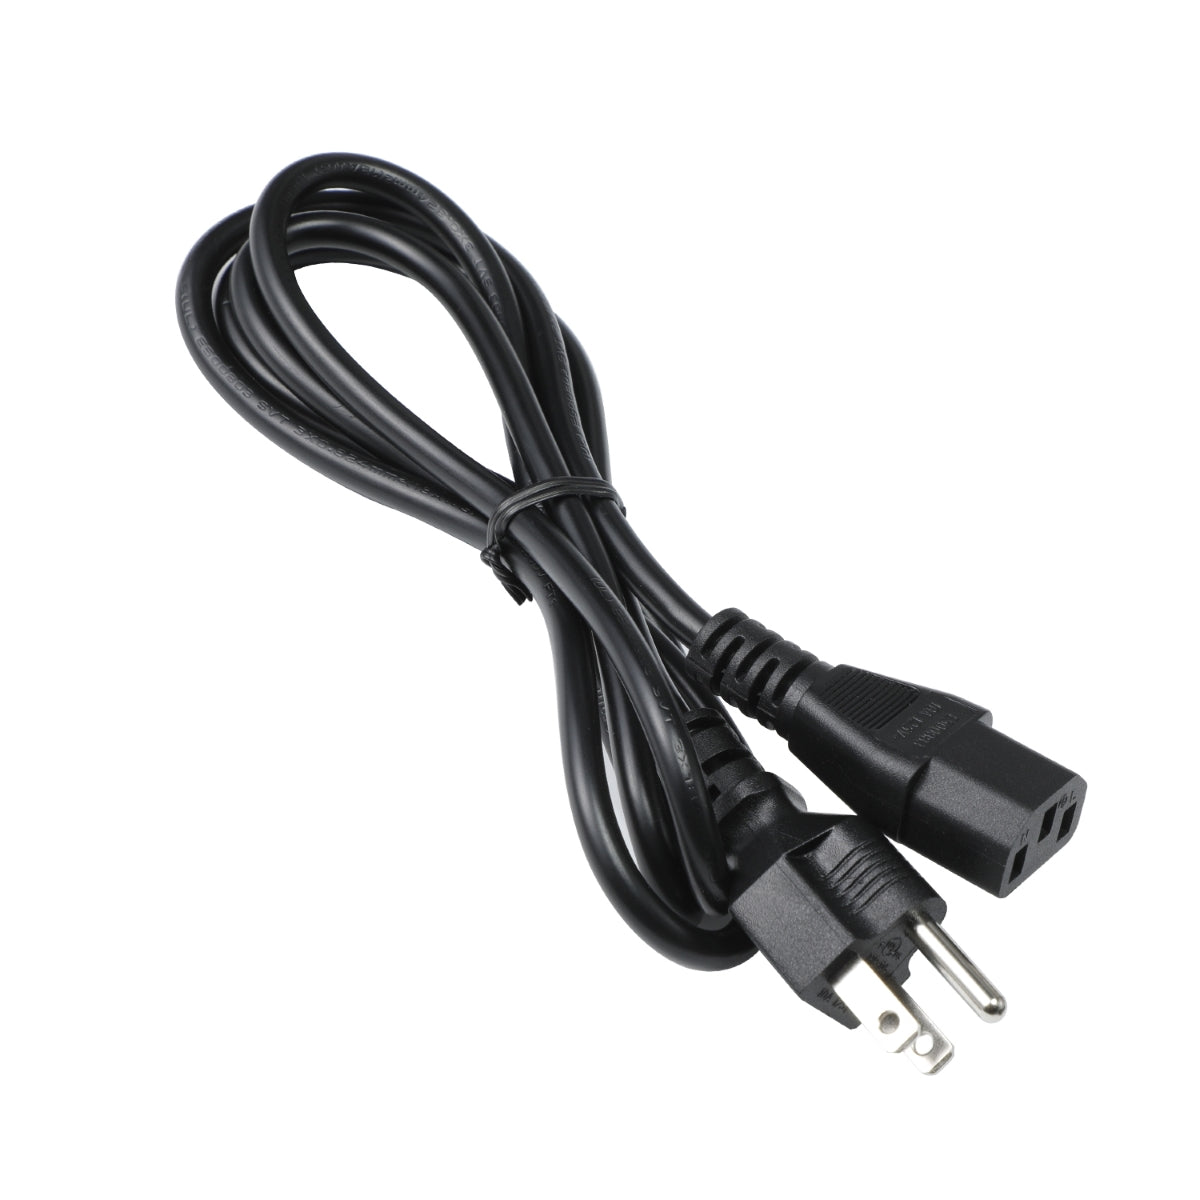 Power Cable for Sony Plasma TV.